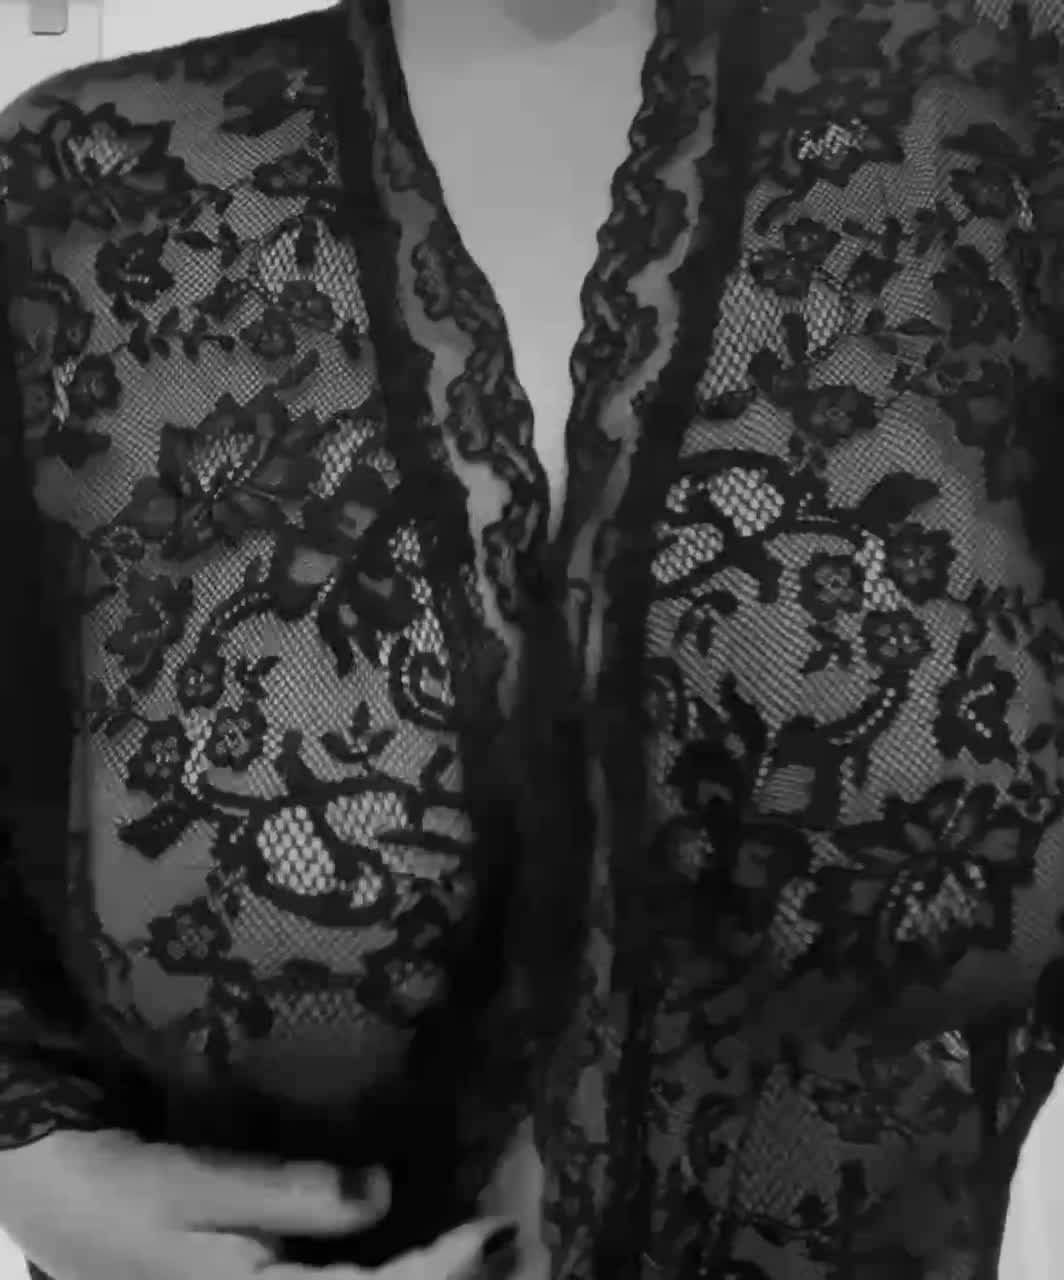 Video by onlythetwoofus with the username @onlythetwoofus, who is a verified user,  July 8, 2022 at 12:15 PM. The post is about the topic See Through and the text says 'Morning💋

#tits | #lingerie | #lace | #seethrough | #blackandwhite |  #bbw | #curvy | #sexycurvy | #realcouple | #allnatural | #nipples | #bigbreasts'